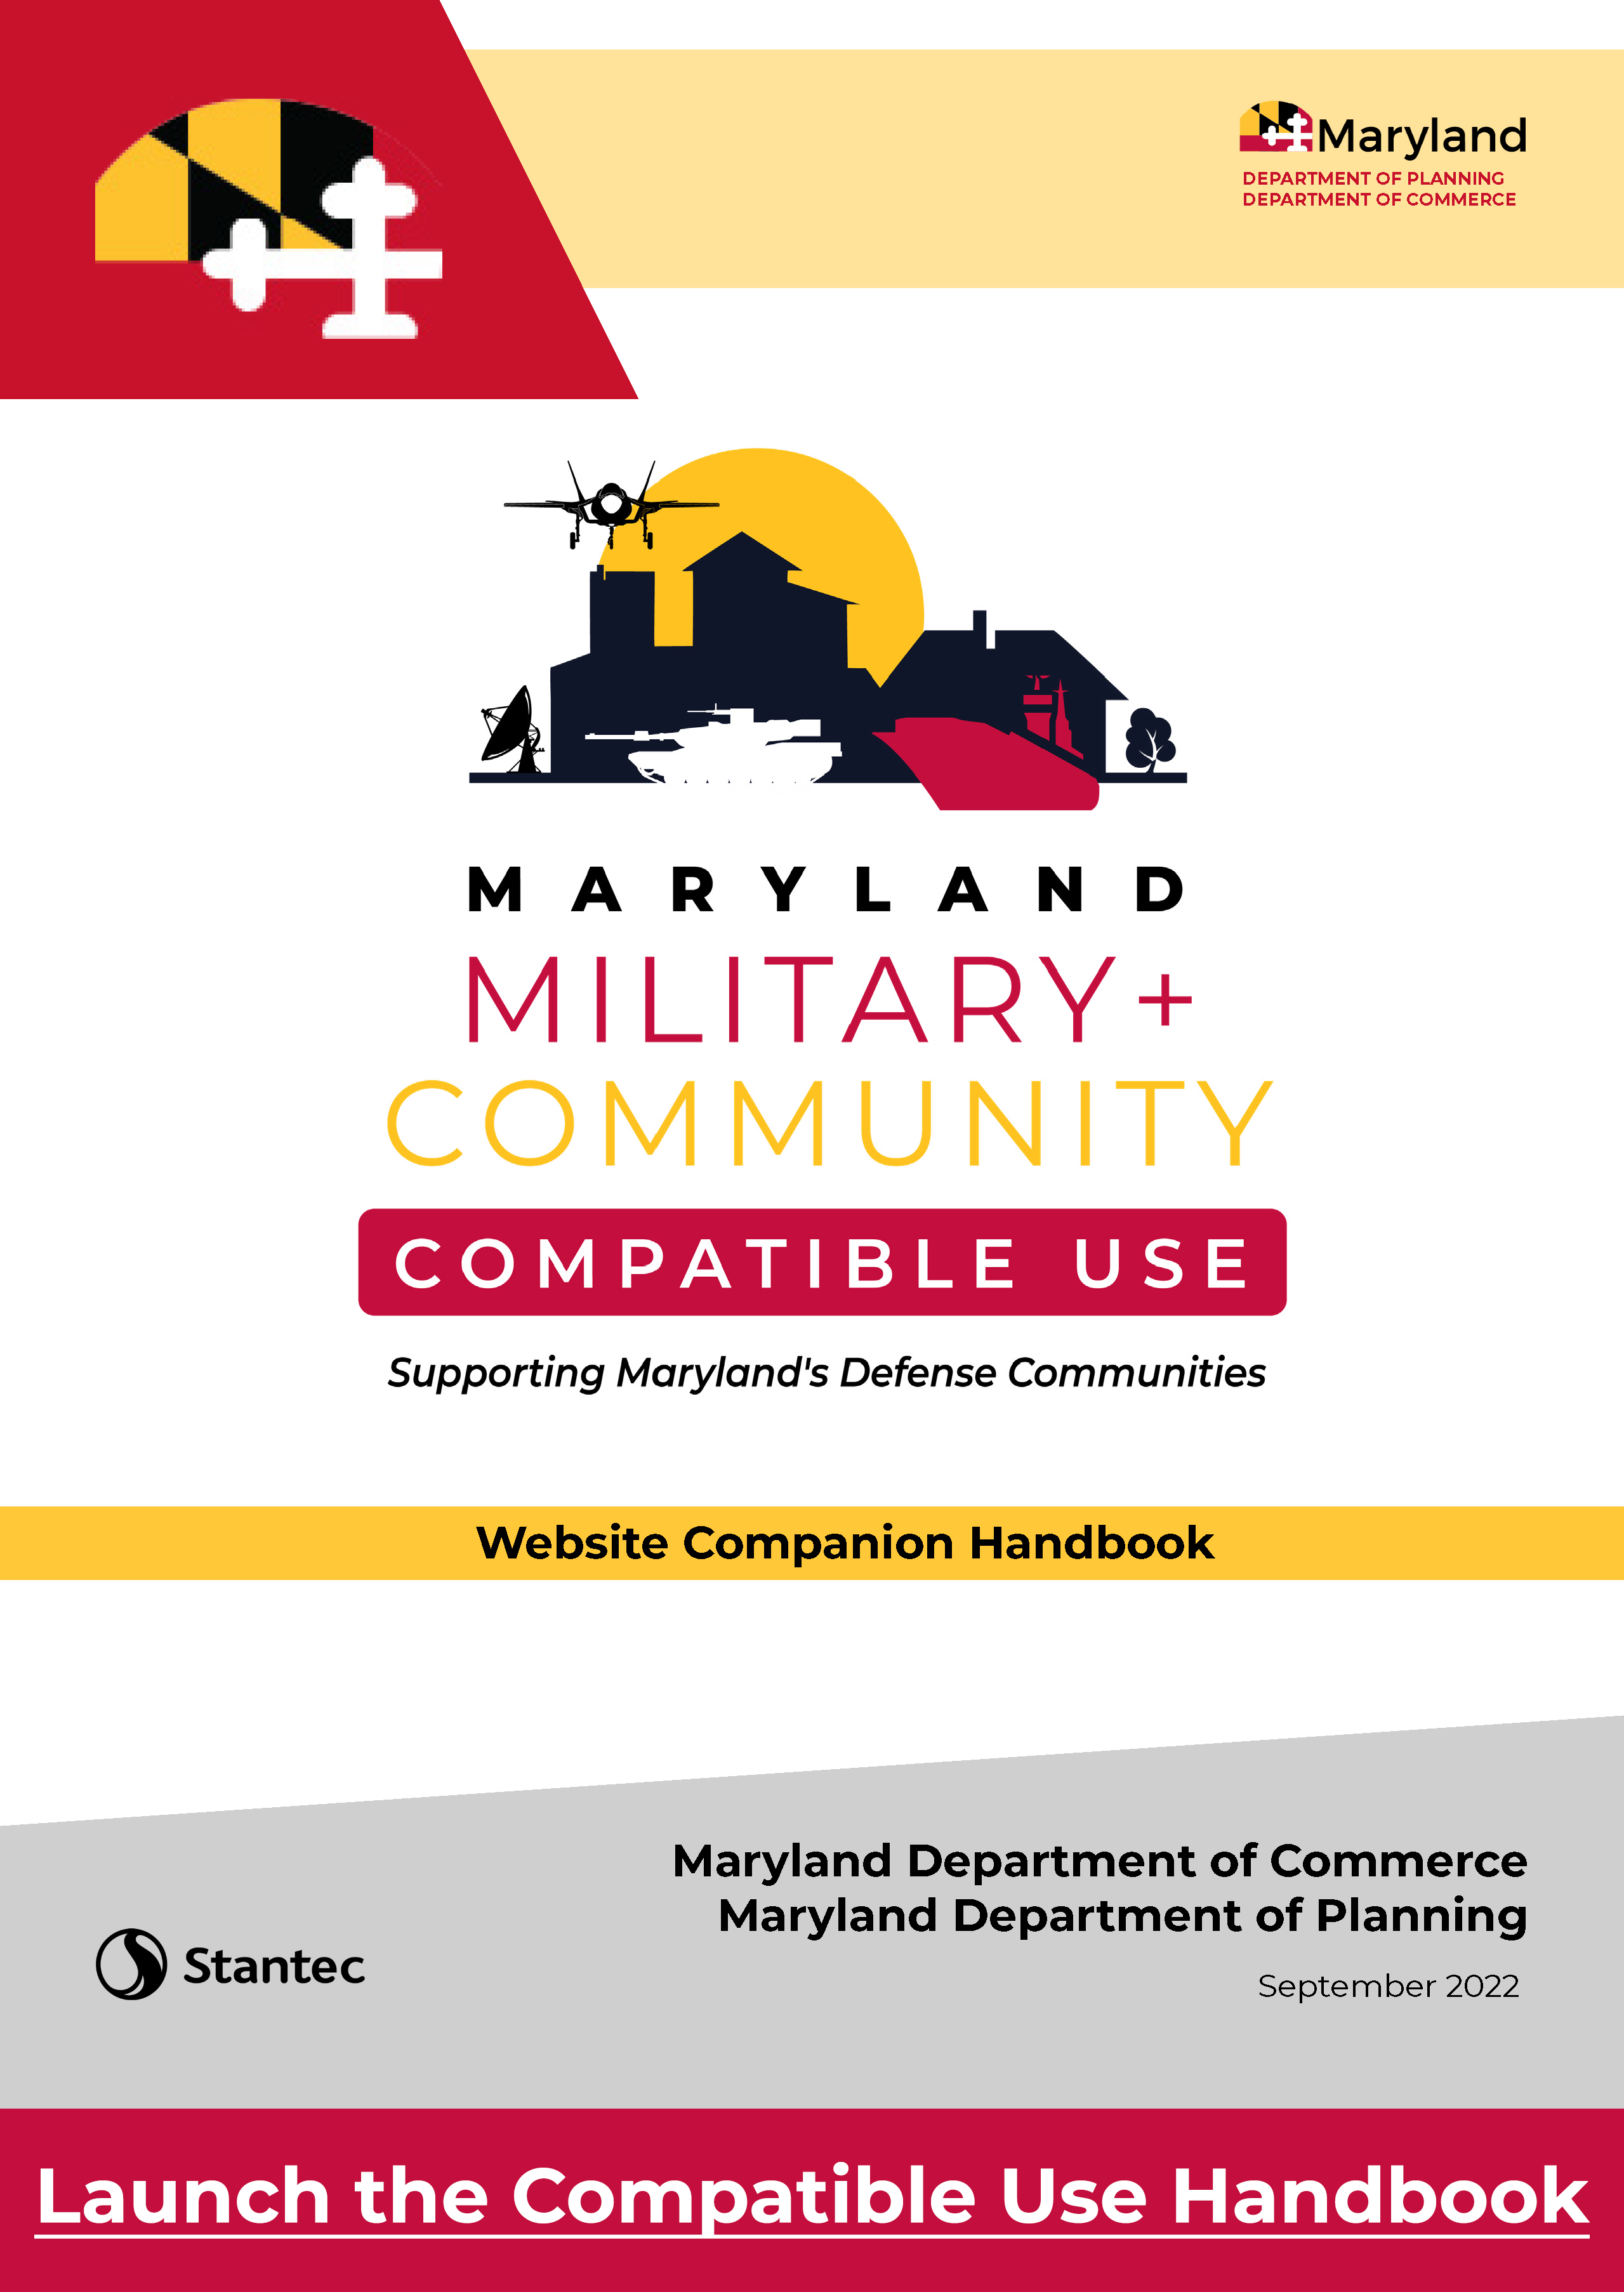 Click to launch the Compatible Use Handbook